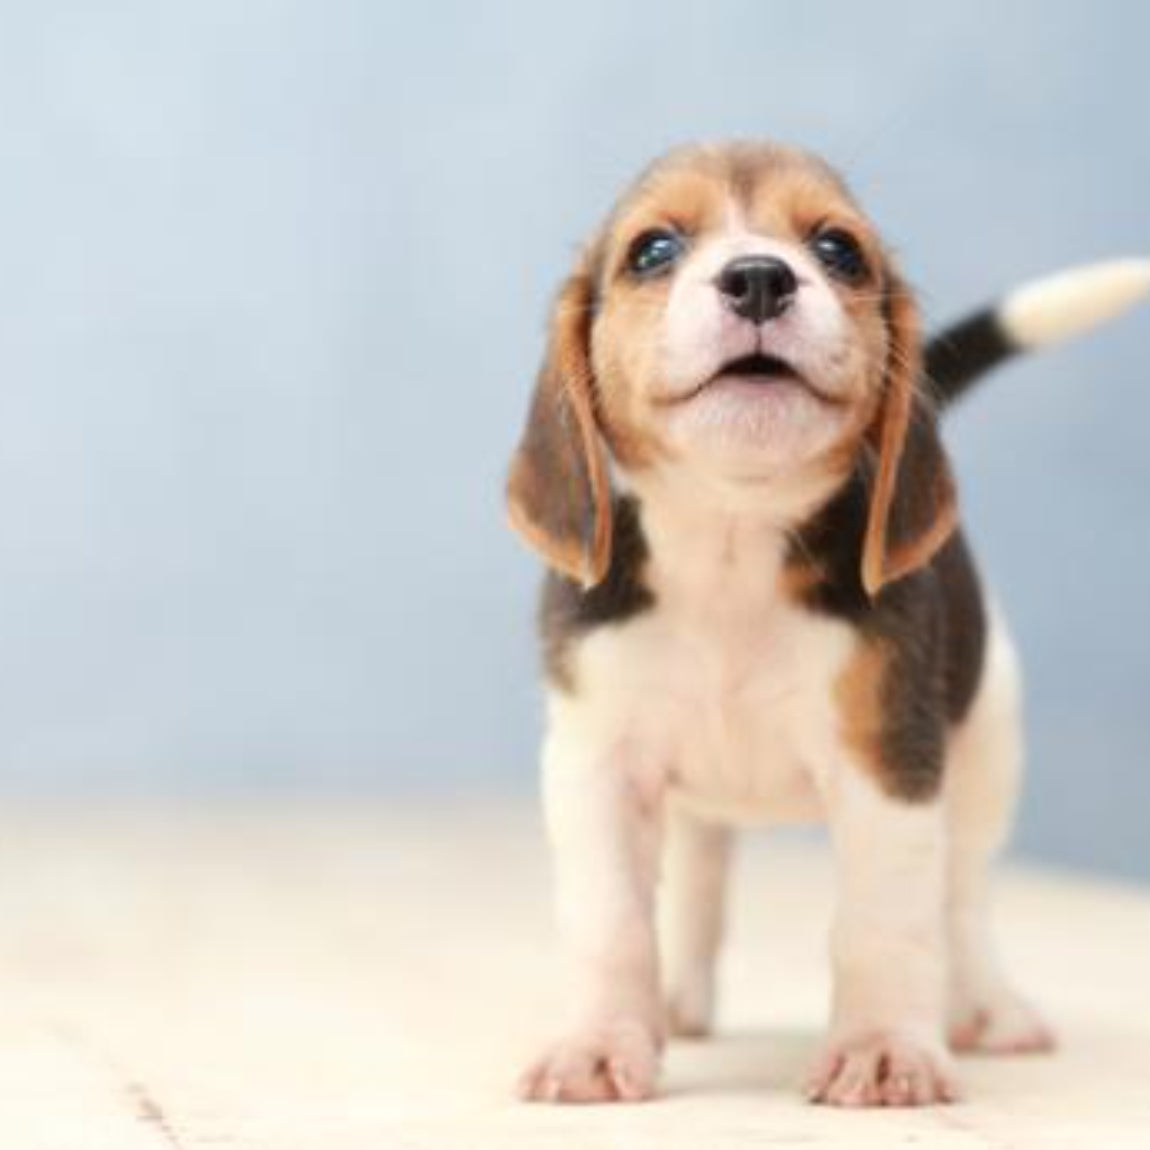 Dog training tips for your new puppy